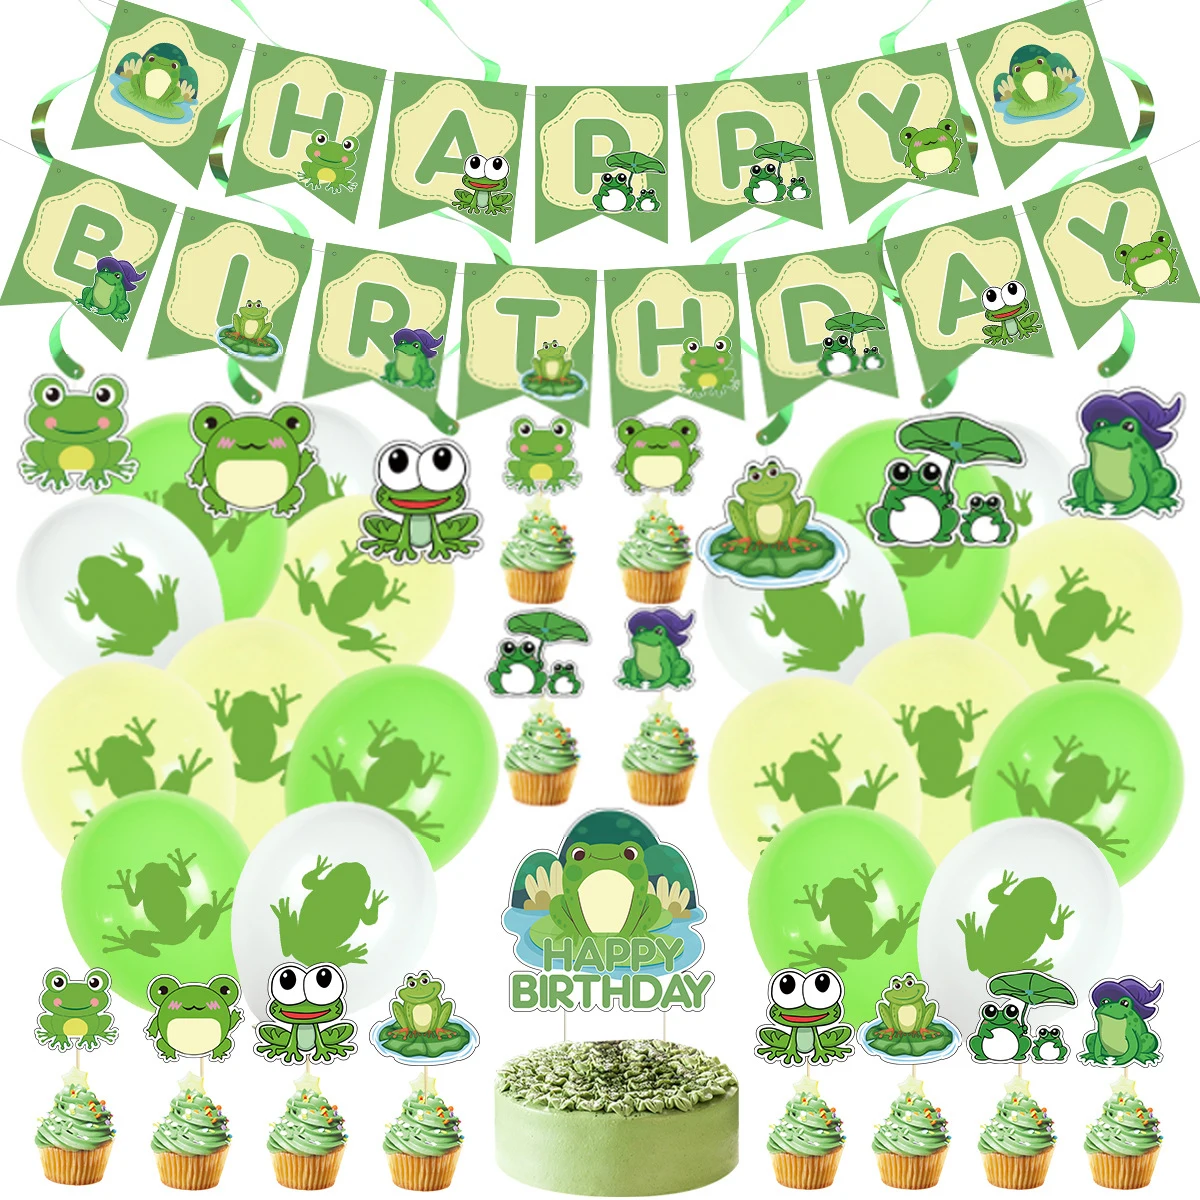 

JOYMEMO Green Frog Theme Birthday Party Decoration Balloon Set with Cake Topper Hanging Swirls Happy Birthday Banner for Kids